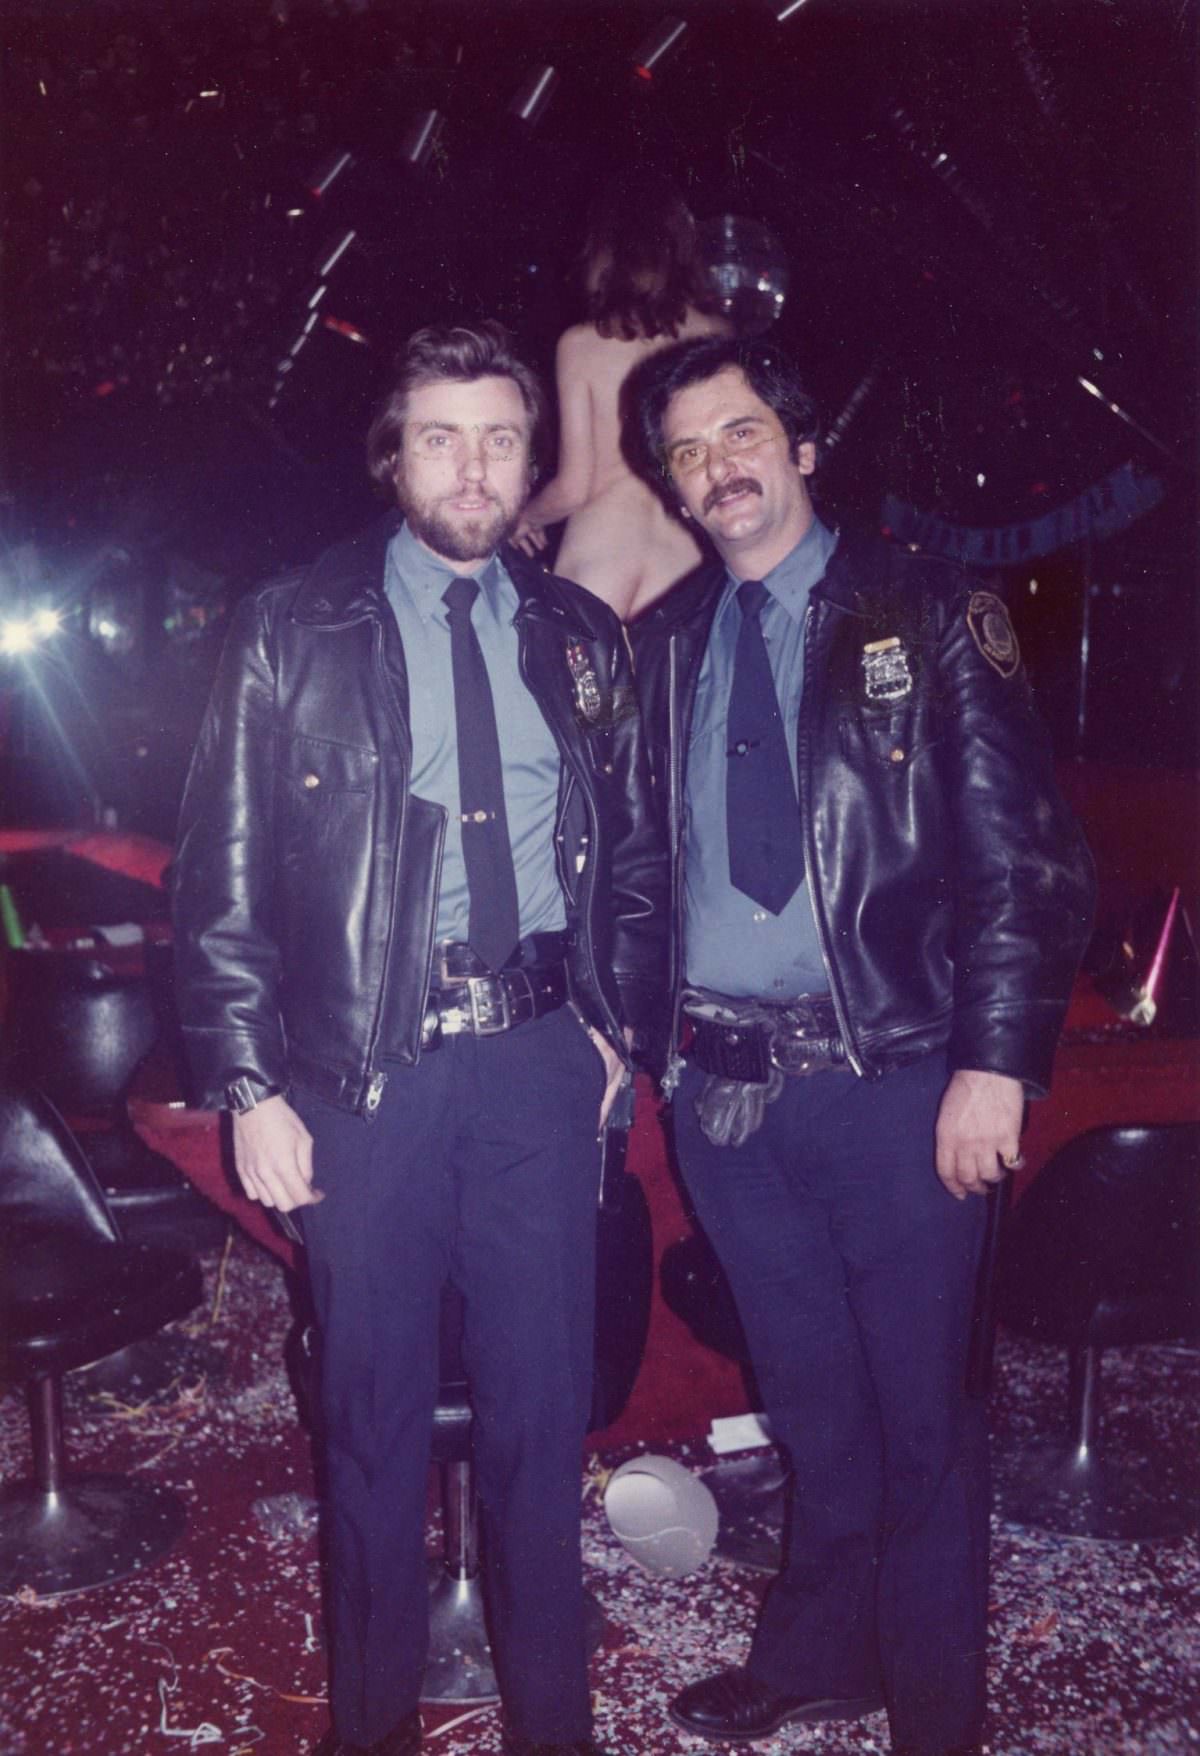 Get Ready To Party: A Wild Ride Through Nyc'S Hottest Clubs Of 1977 By Meryl Meisler